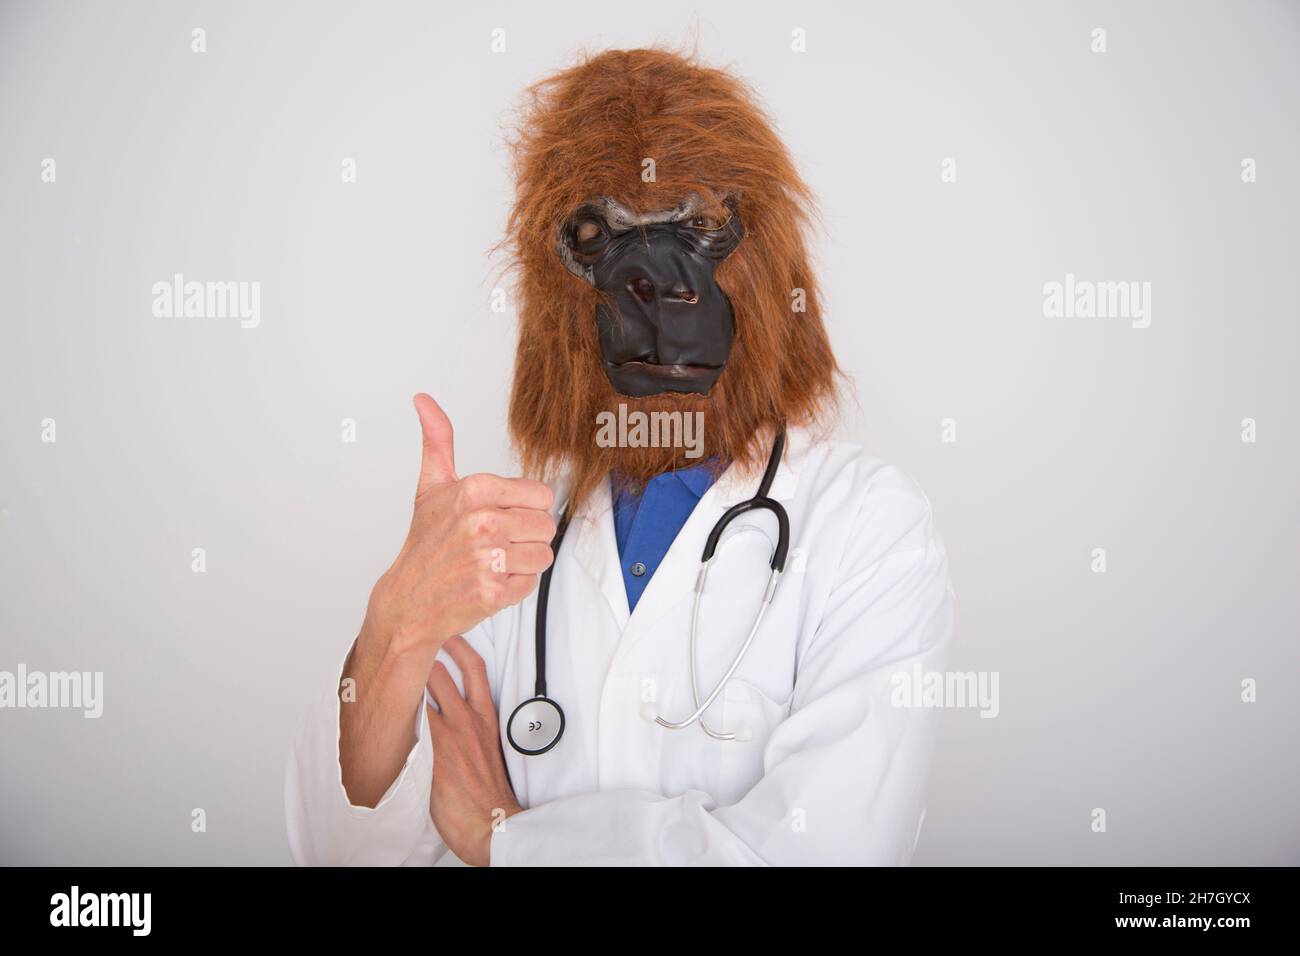 man in gorilla mask with doctor's coat and stethoscope and thumbs-up on white background Stock Photo